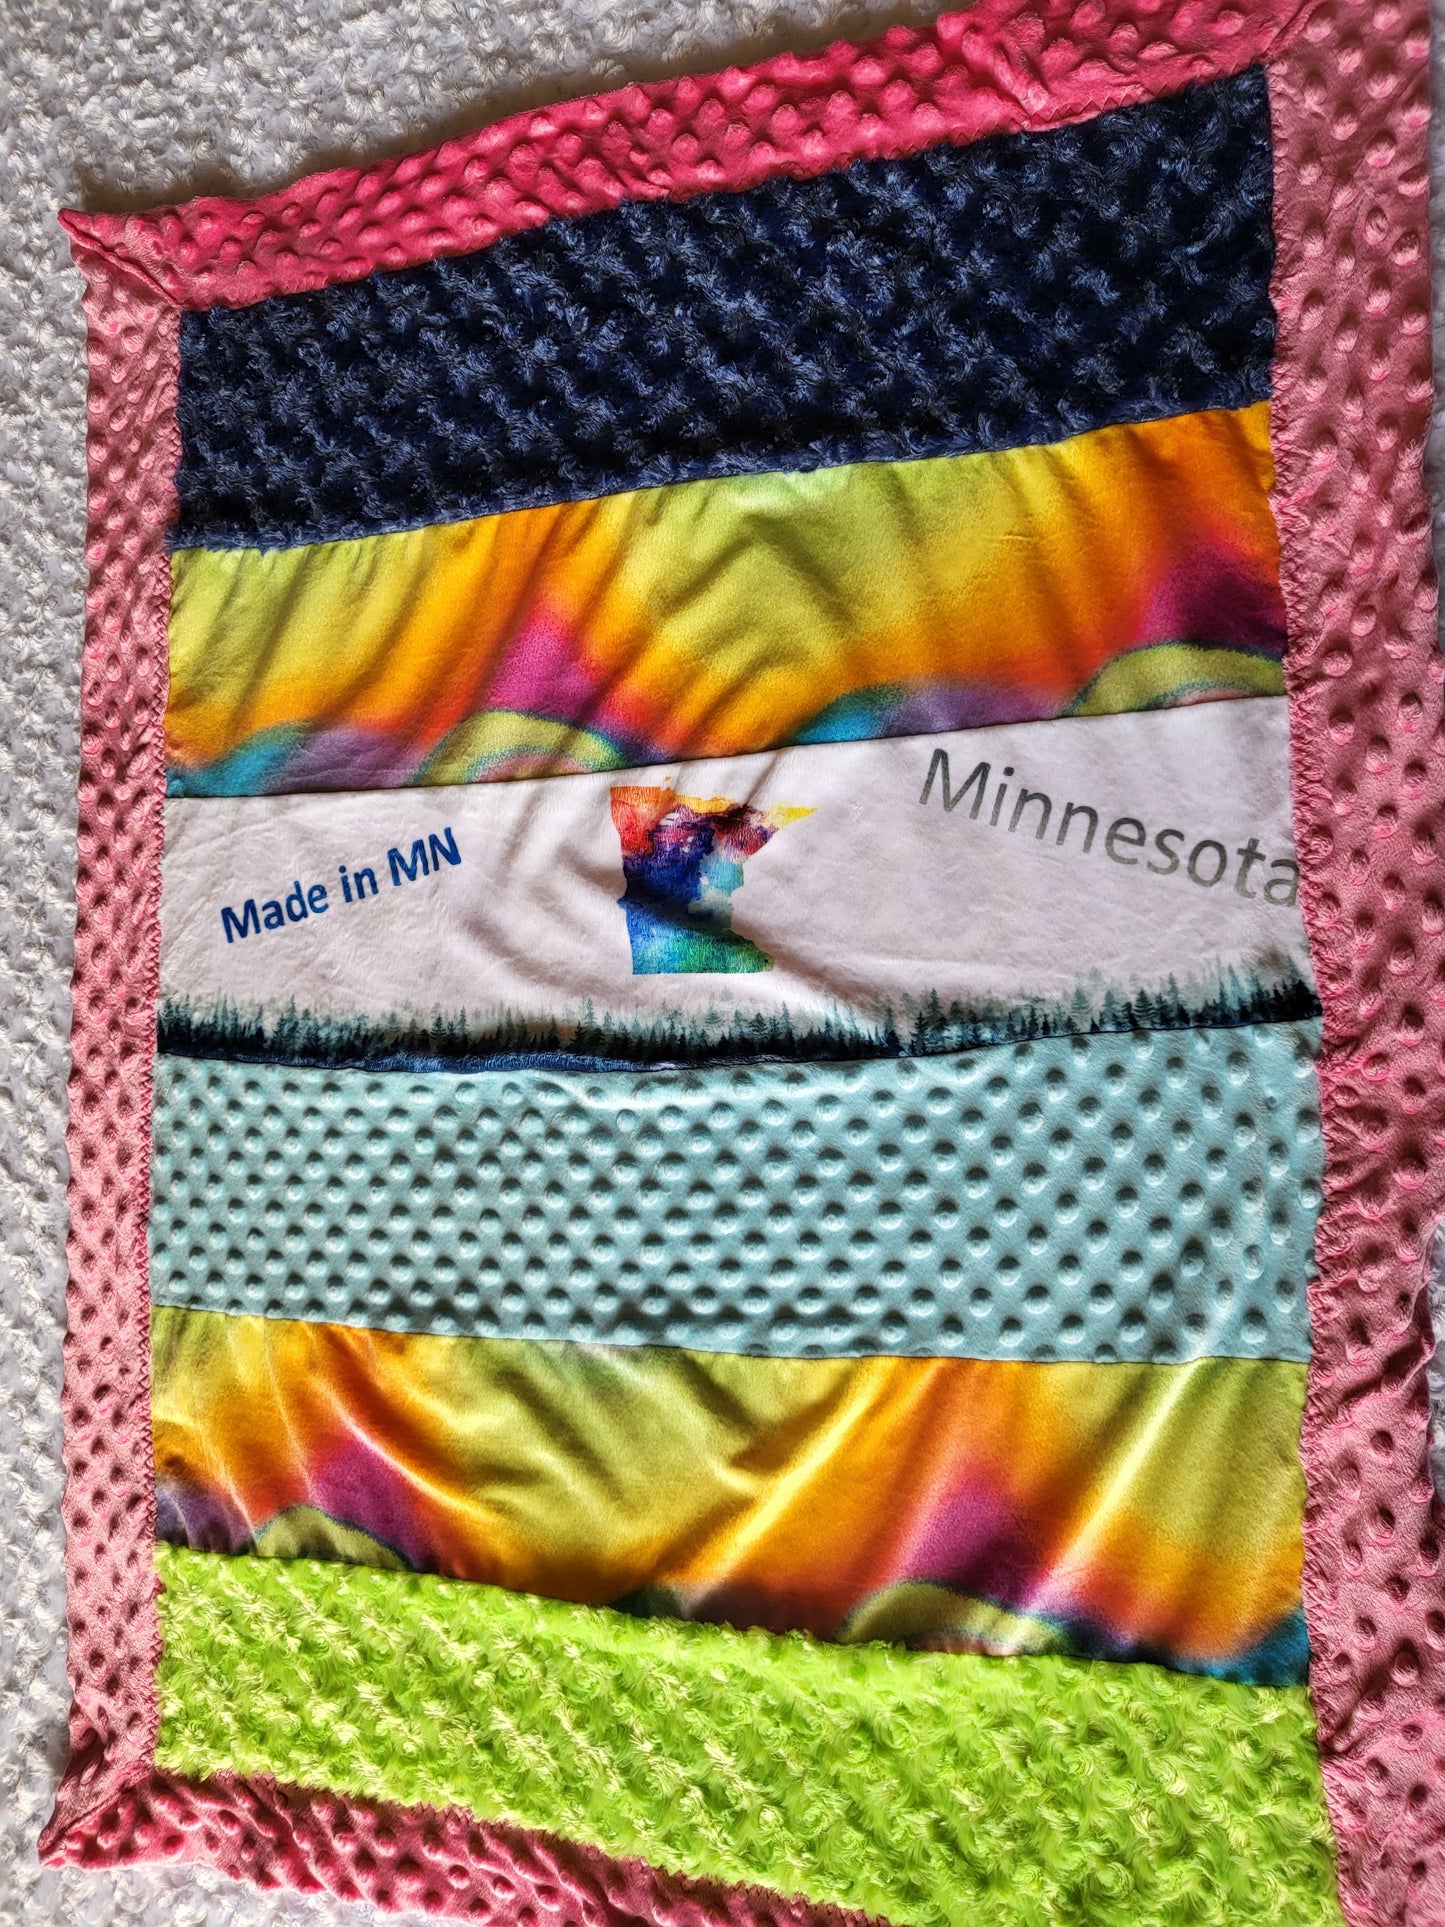 Baby size minky blanket -made in MN